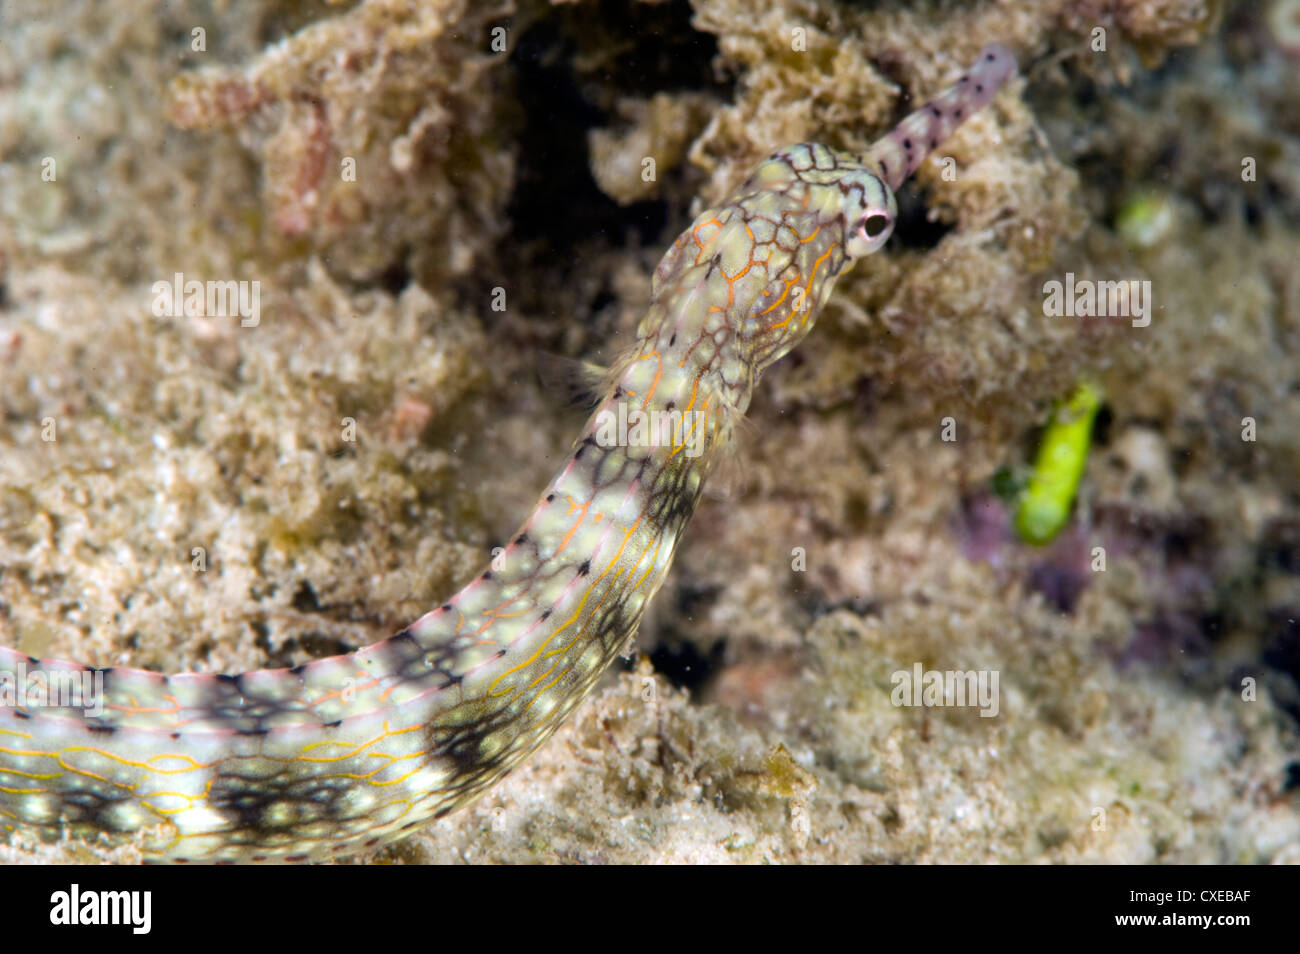 Reeftop pipefish (Corythoichthys haematopterus), grows to 18cm, Indo-west Pacific waters, Philippines, Southeast Asia, Asia Stock Photo